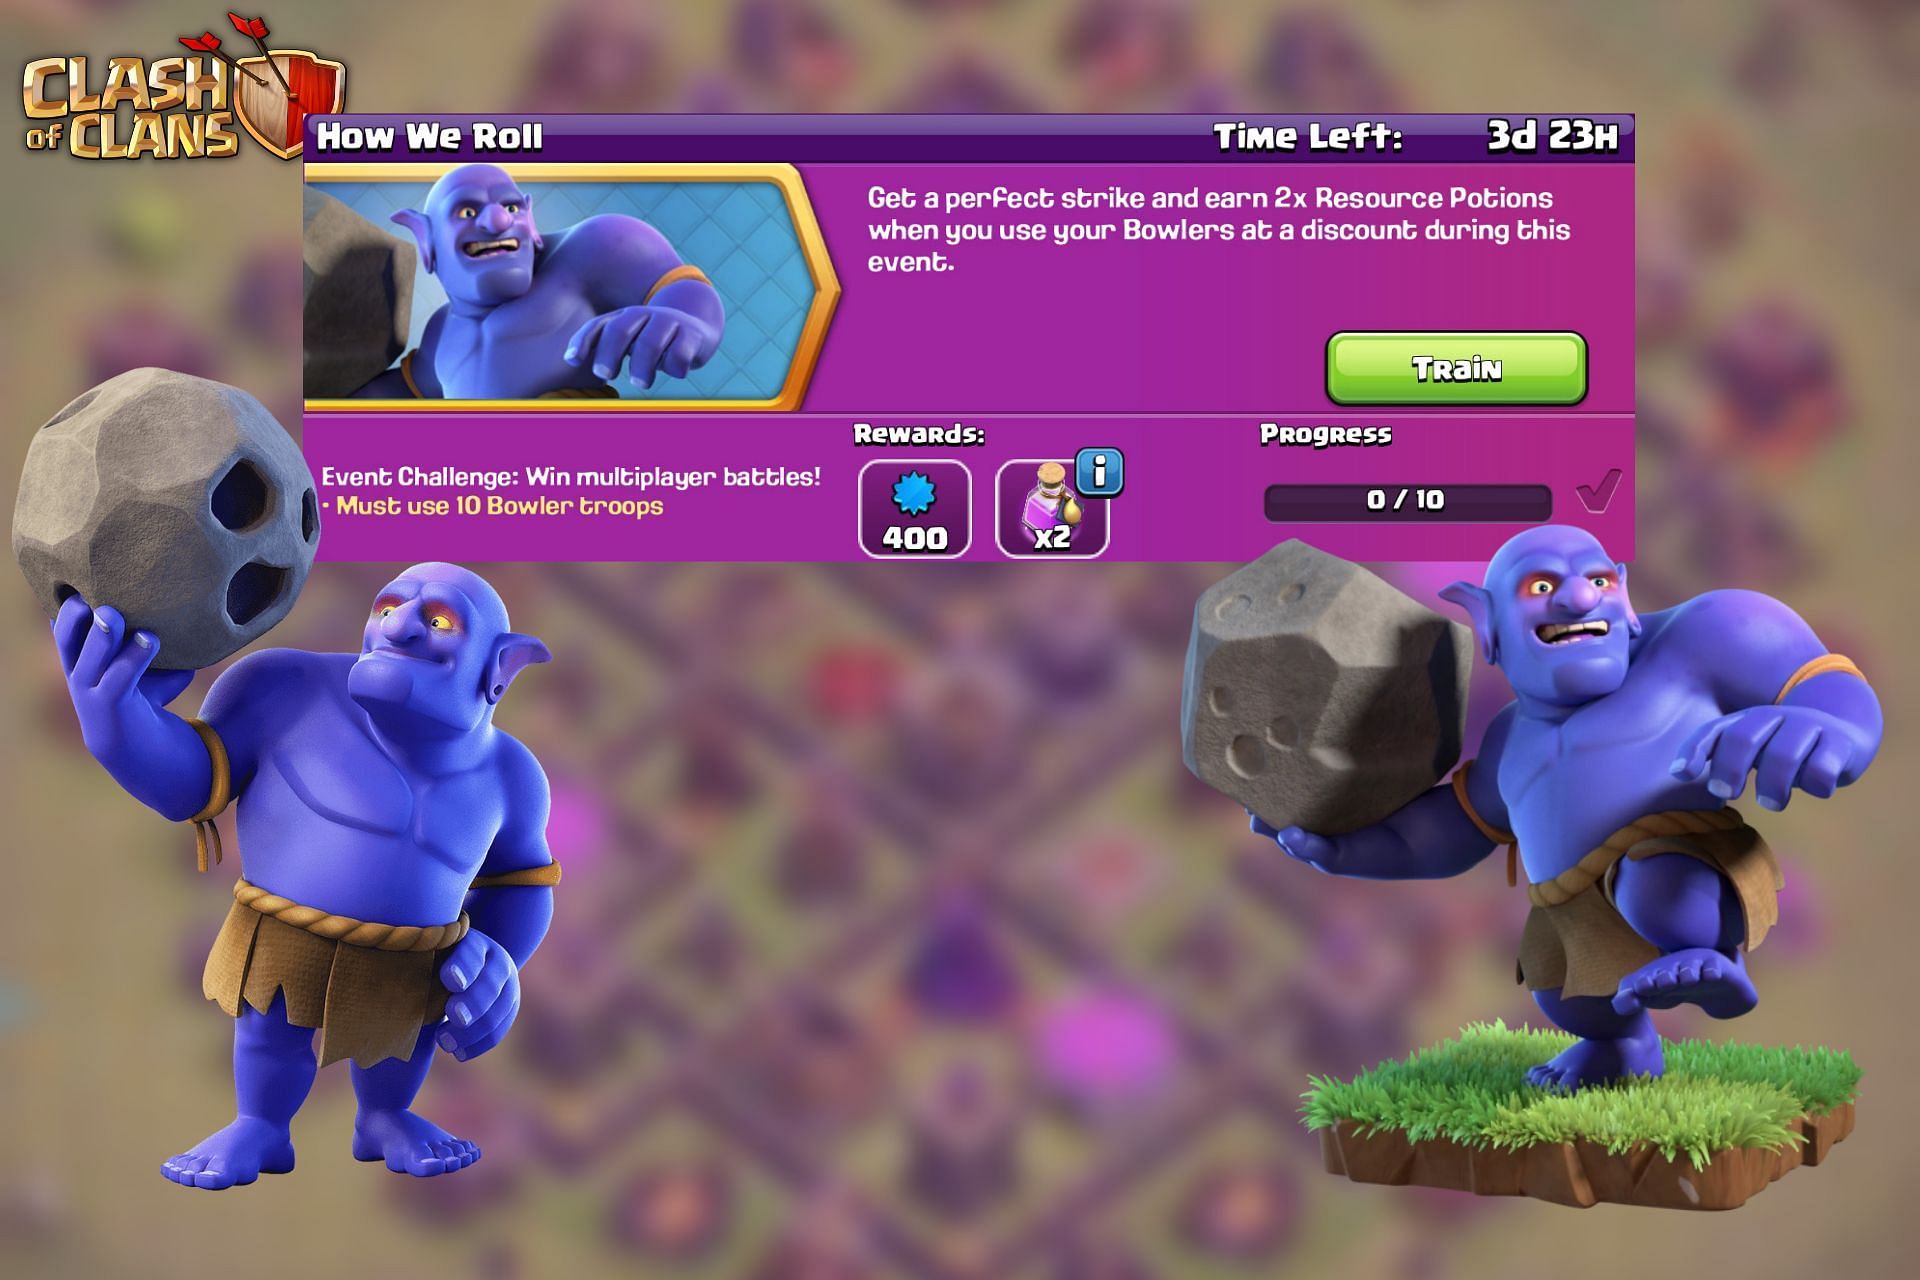 Discussing the How We Roll Challenge in Clash of Clans (Image via Sportskeeda)